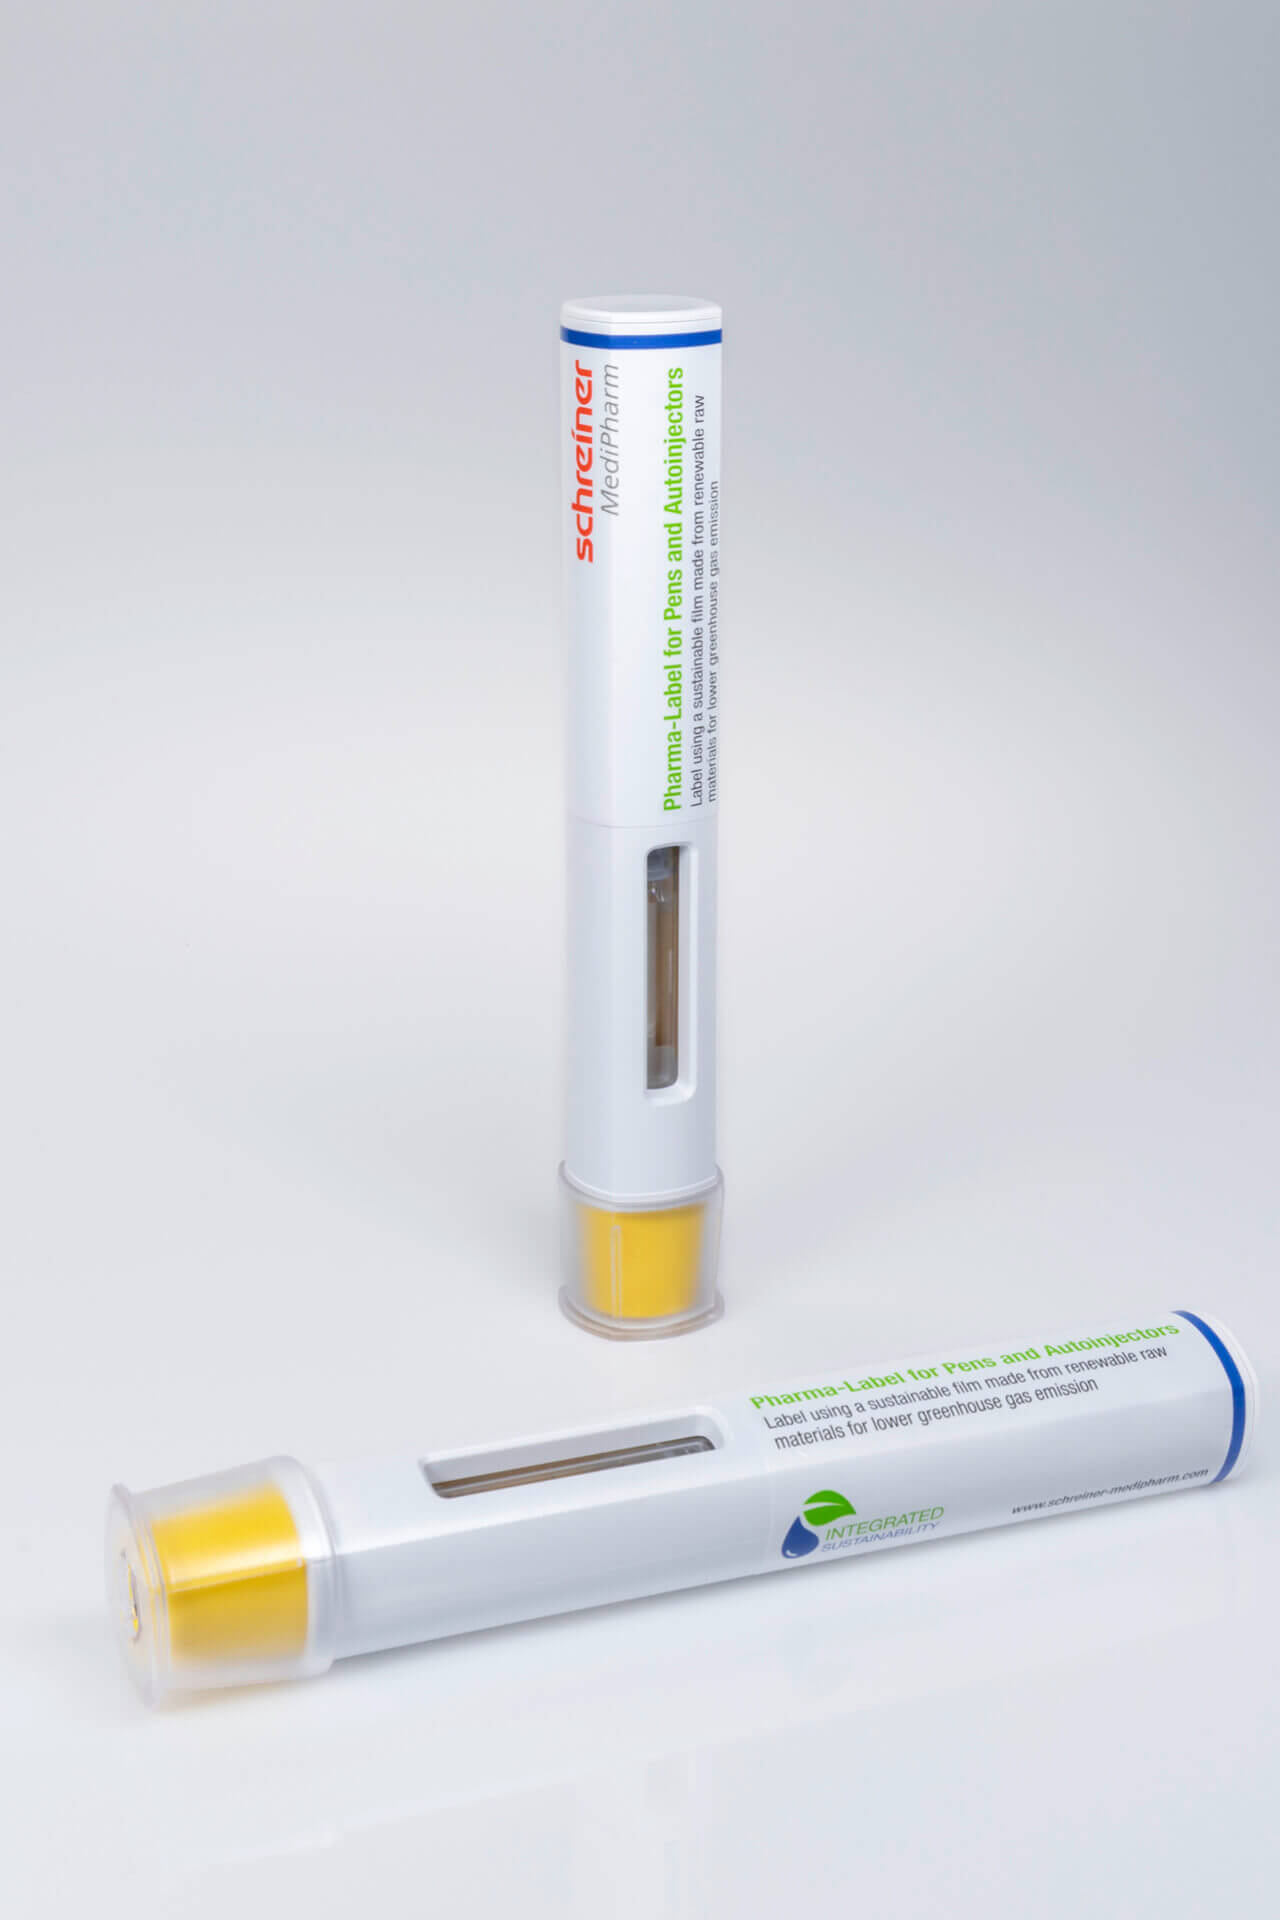 Autoinjectors are used for easy self-medication. The marking label made of environmentally friendly material can be equipped with individually combinable functions.